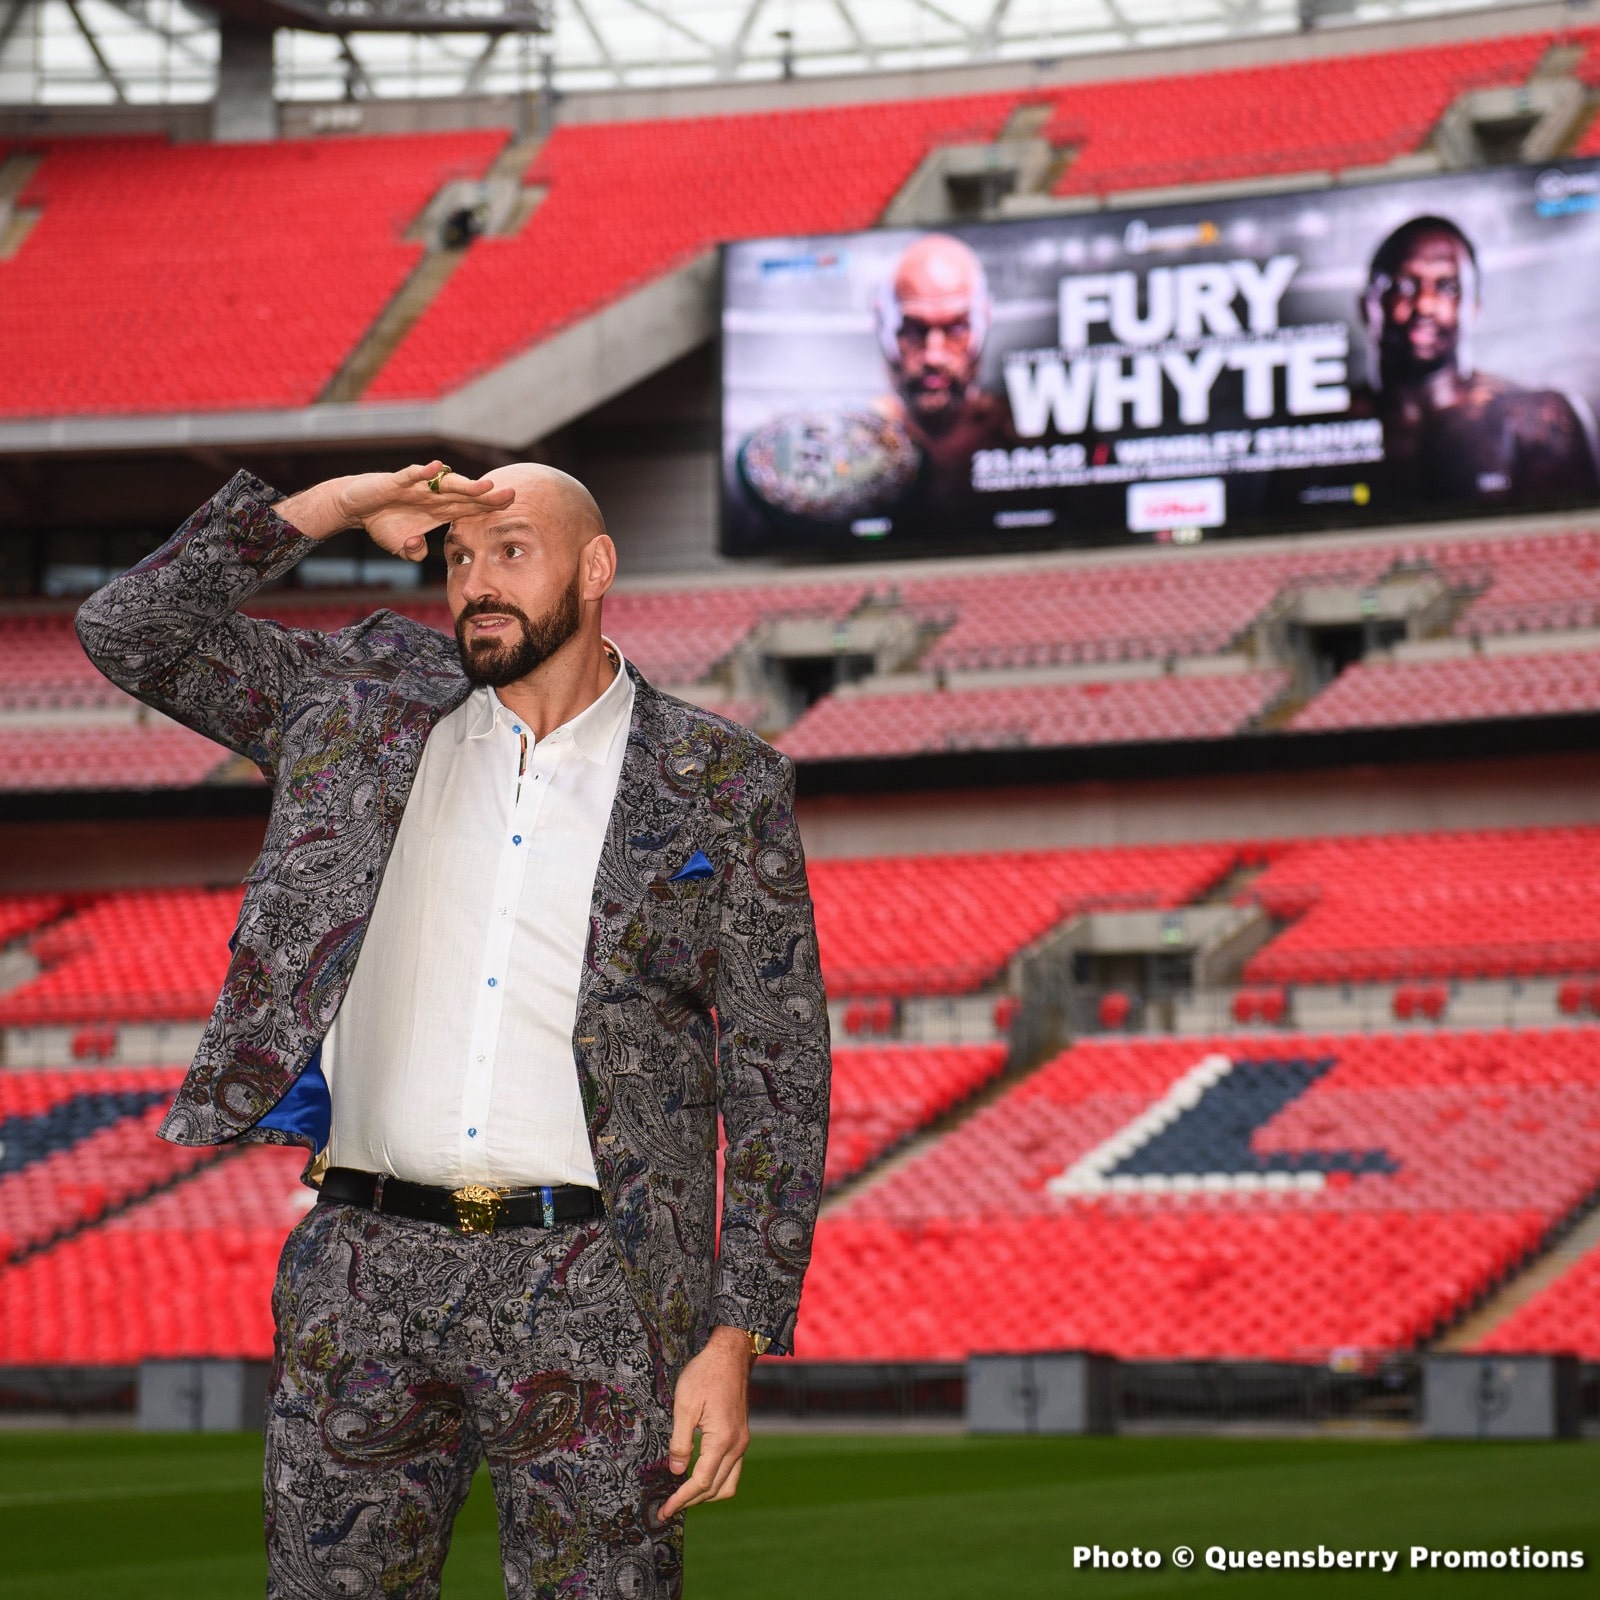 Will The Tyson Fury - Dillian Whyte Fight Go Ahead As Scheduled? Whyte's Lawyer “Not Sure”